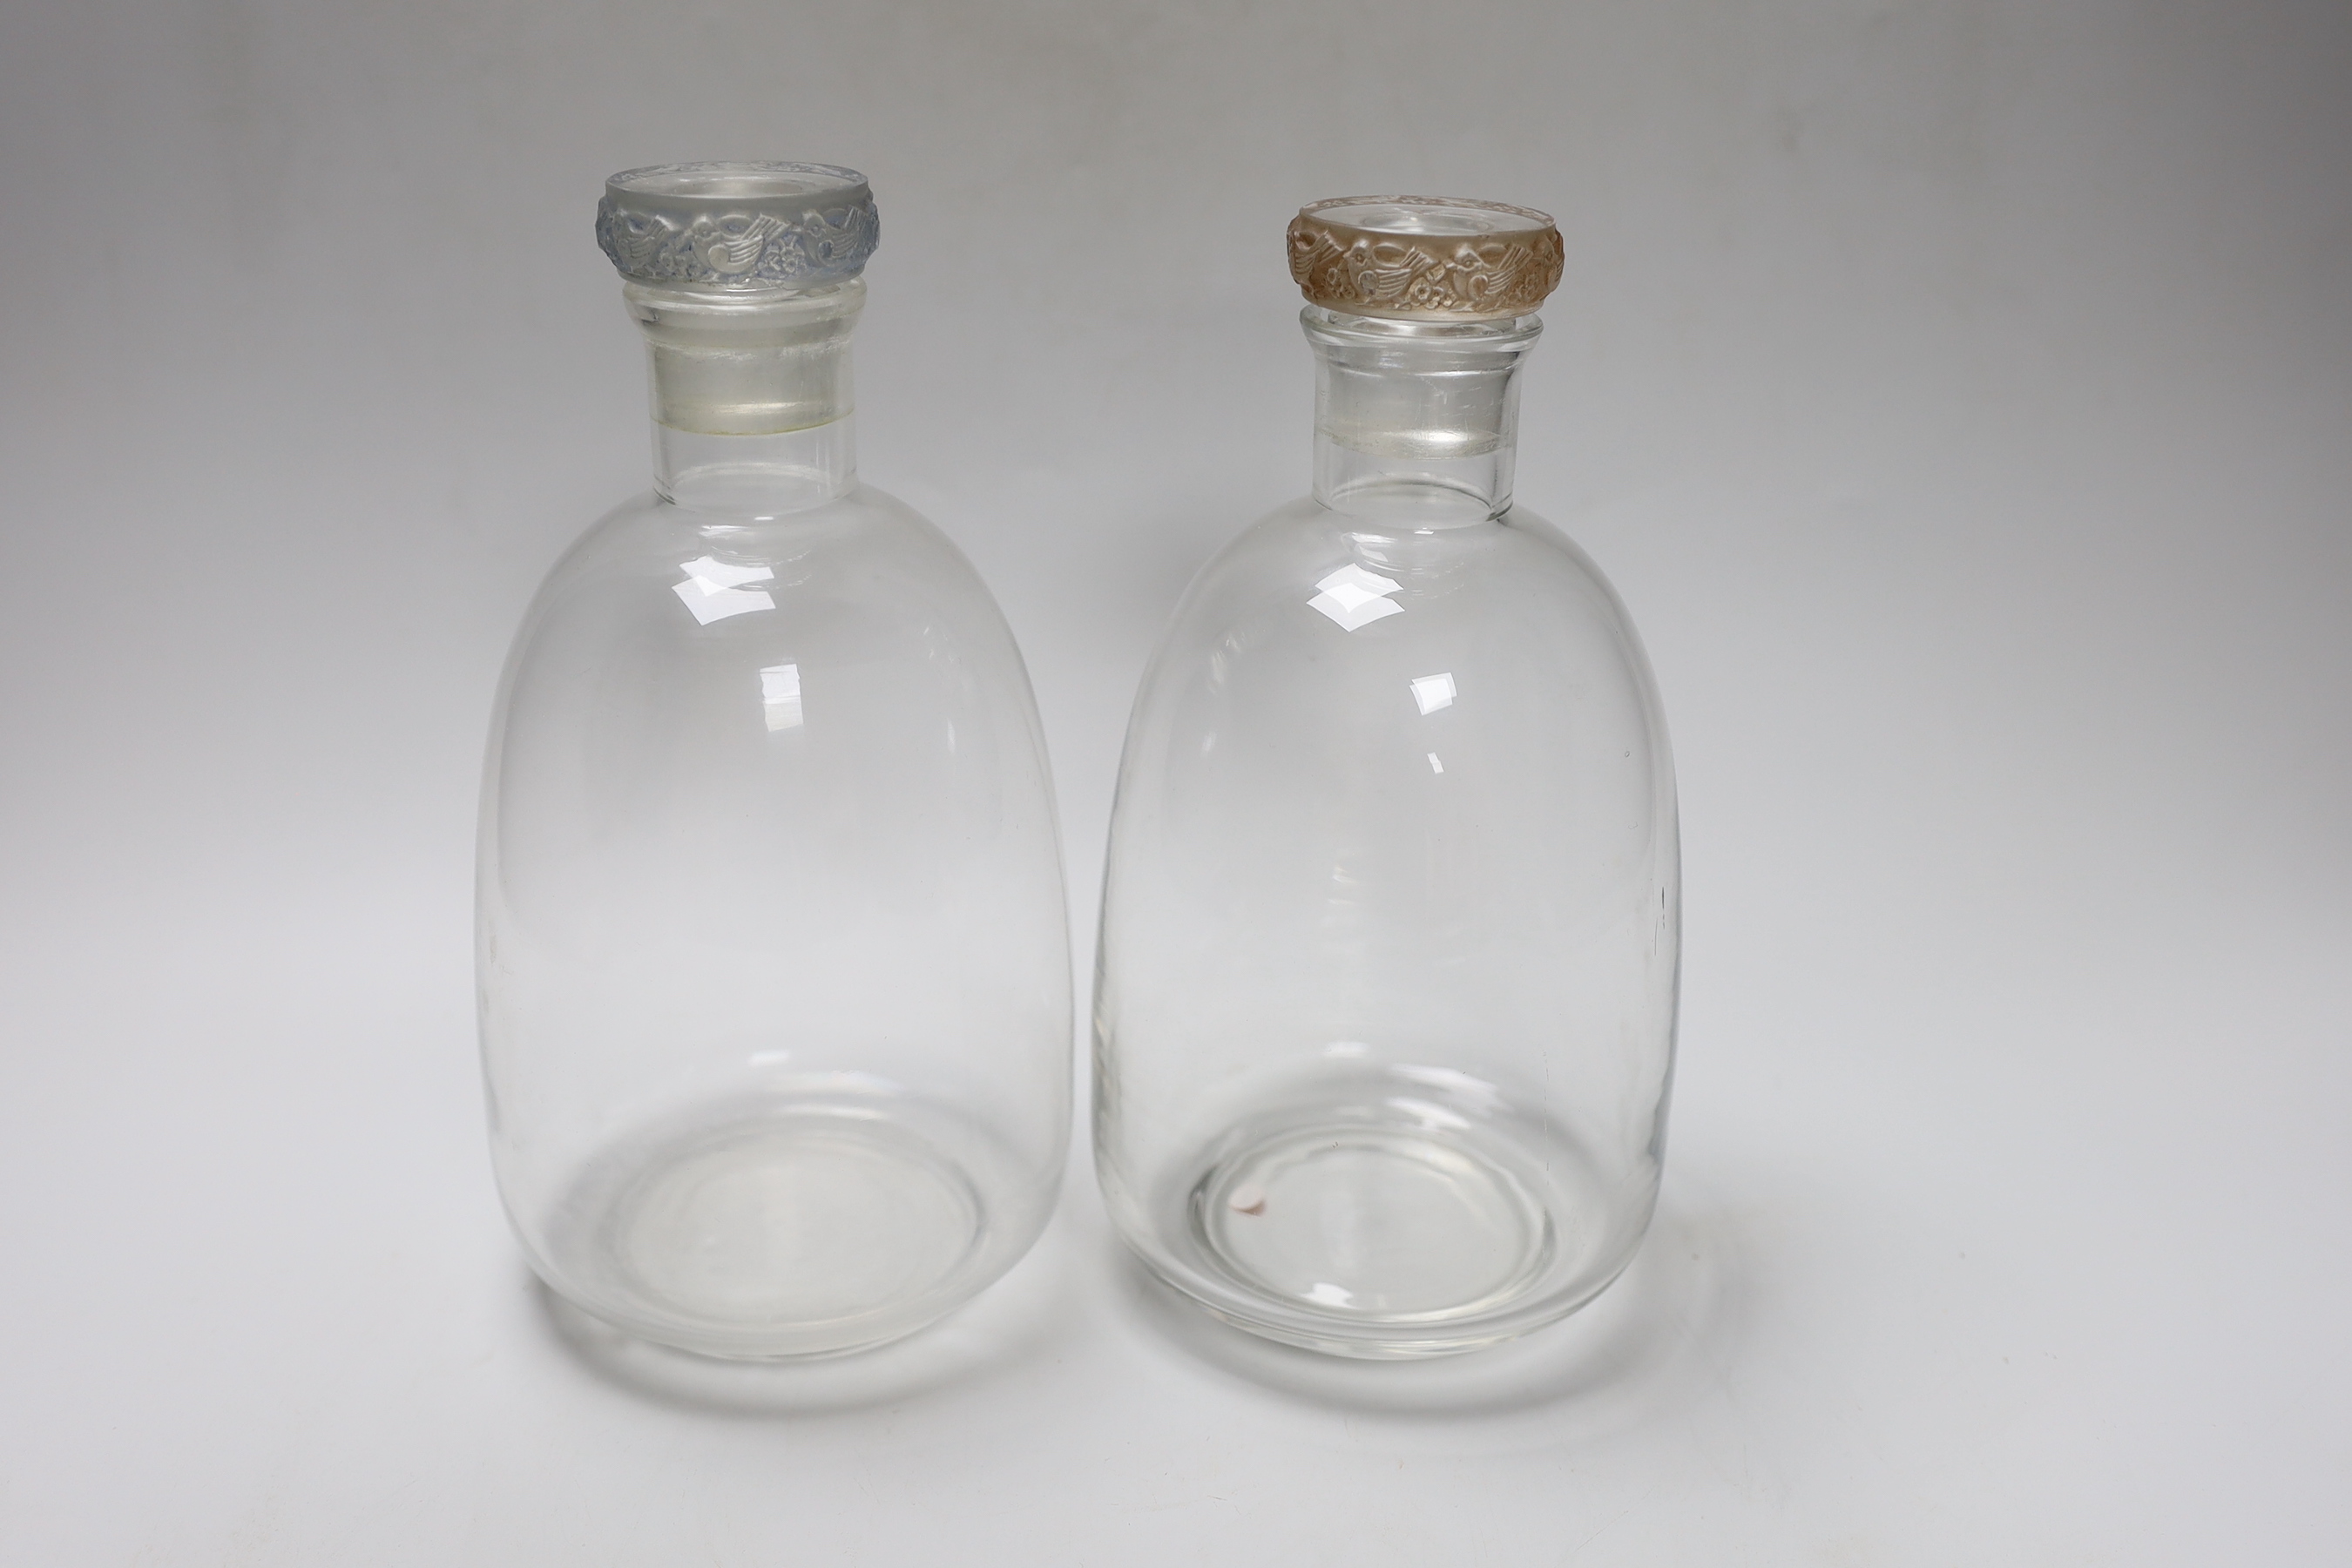 A near pair of Lalique glass decanters, one with blue tinted stopper, the other sepia tinted, 22cm tall                                                                                                                     